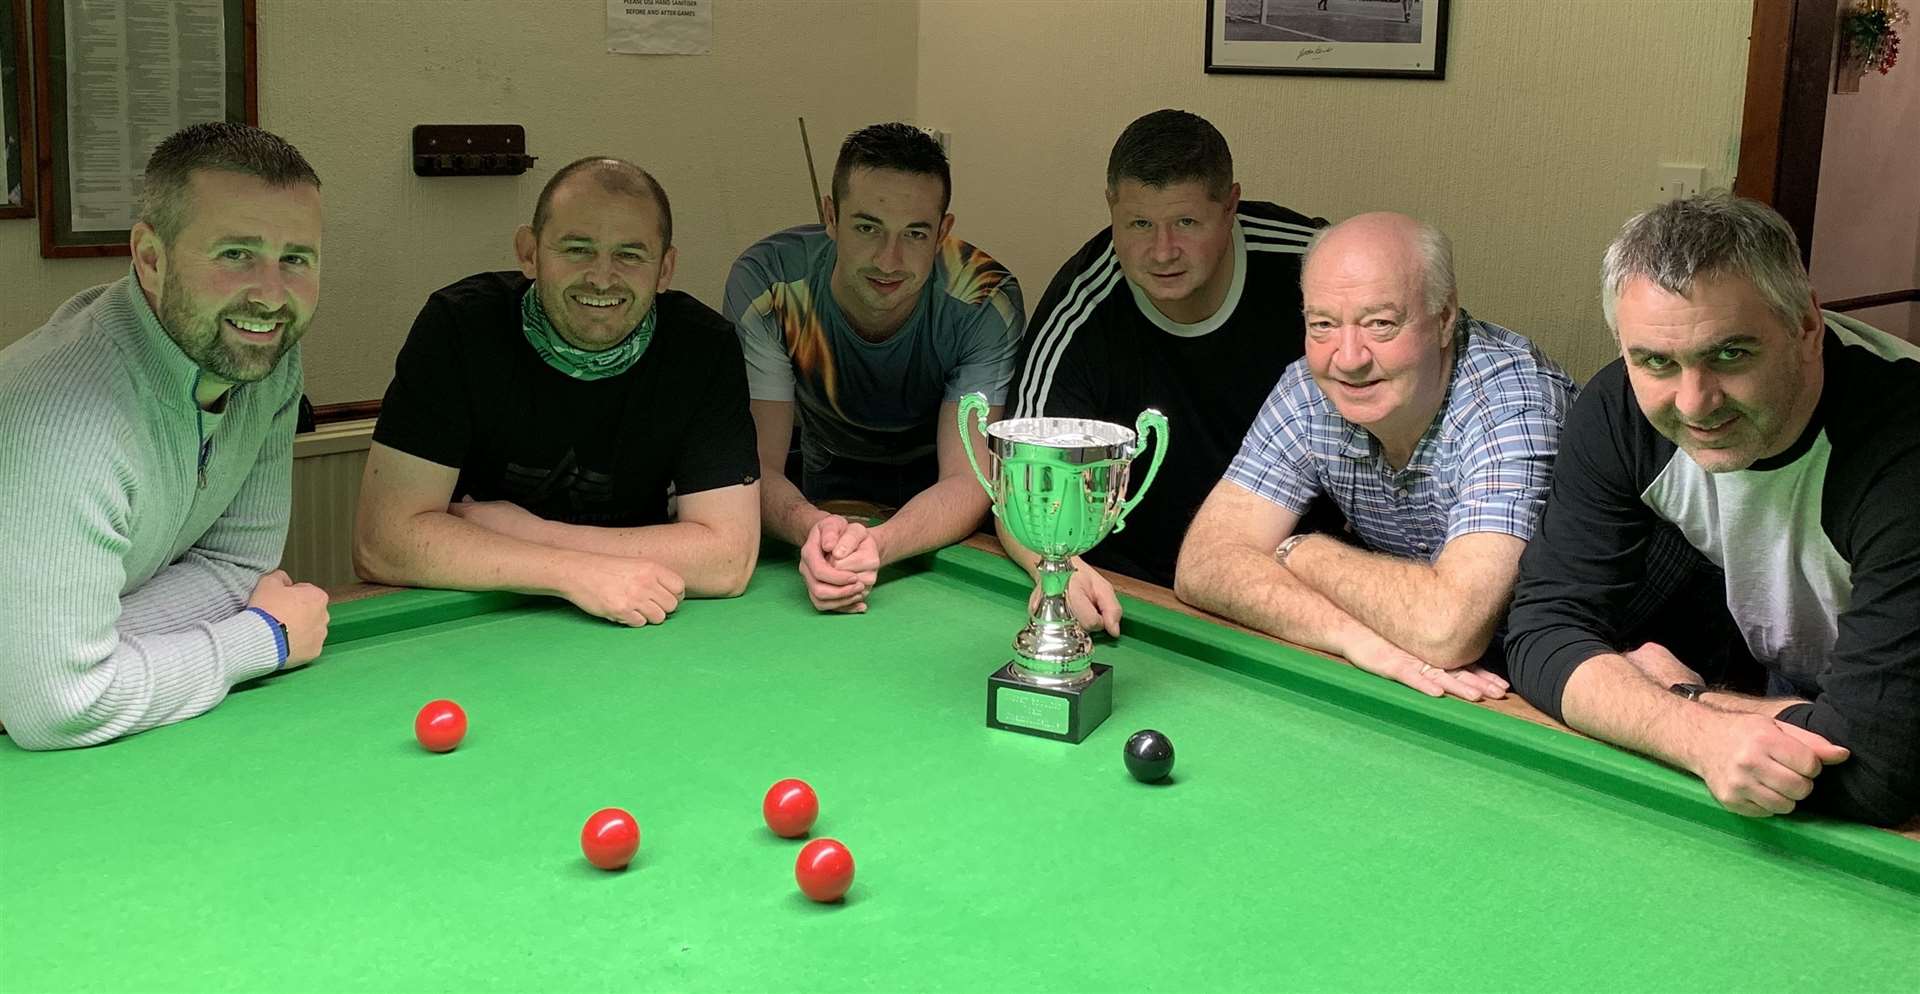 The New Club 1 squad who were crowned Moray snooker team champions.